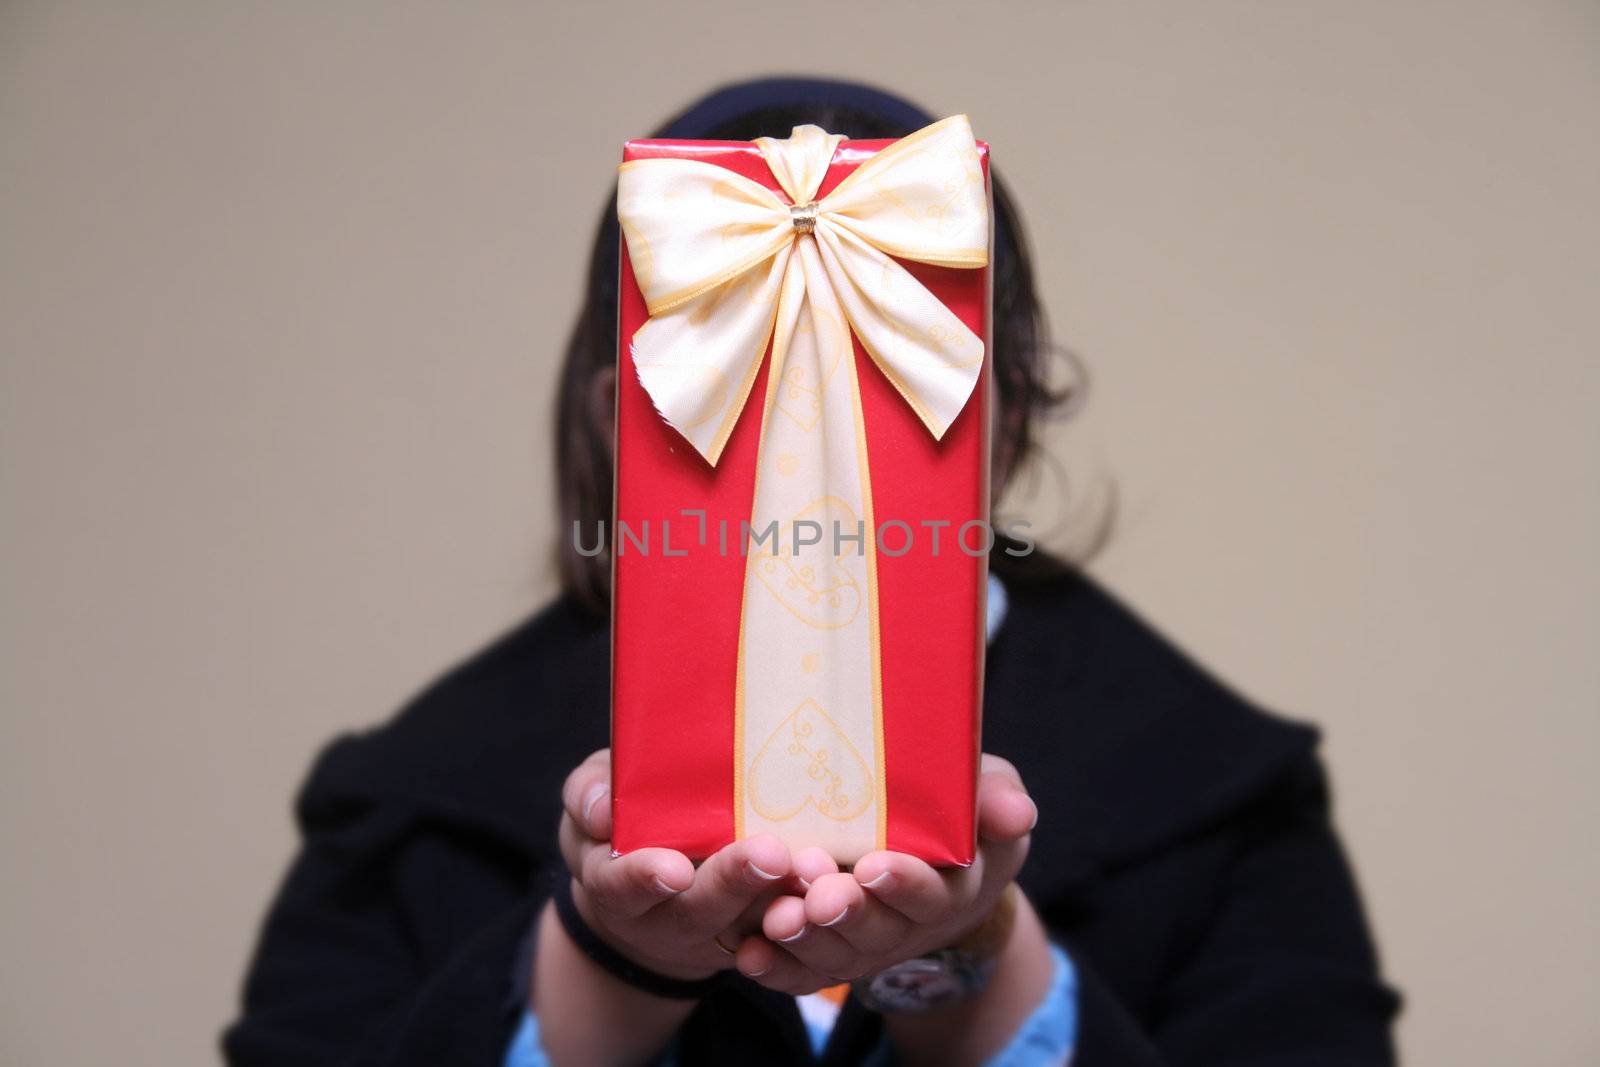 young girl giving gifts (focus on the present)